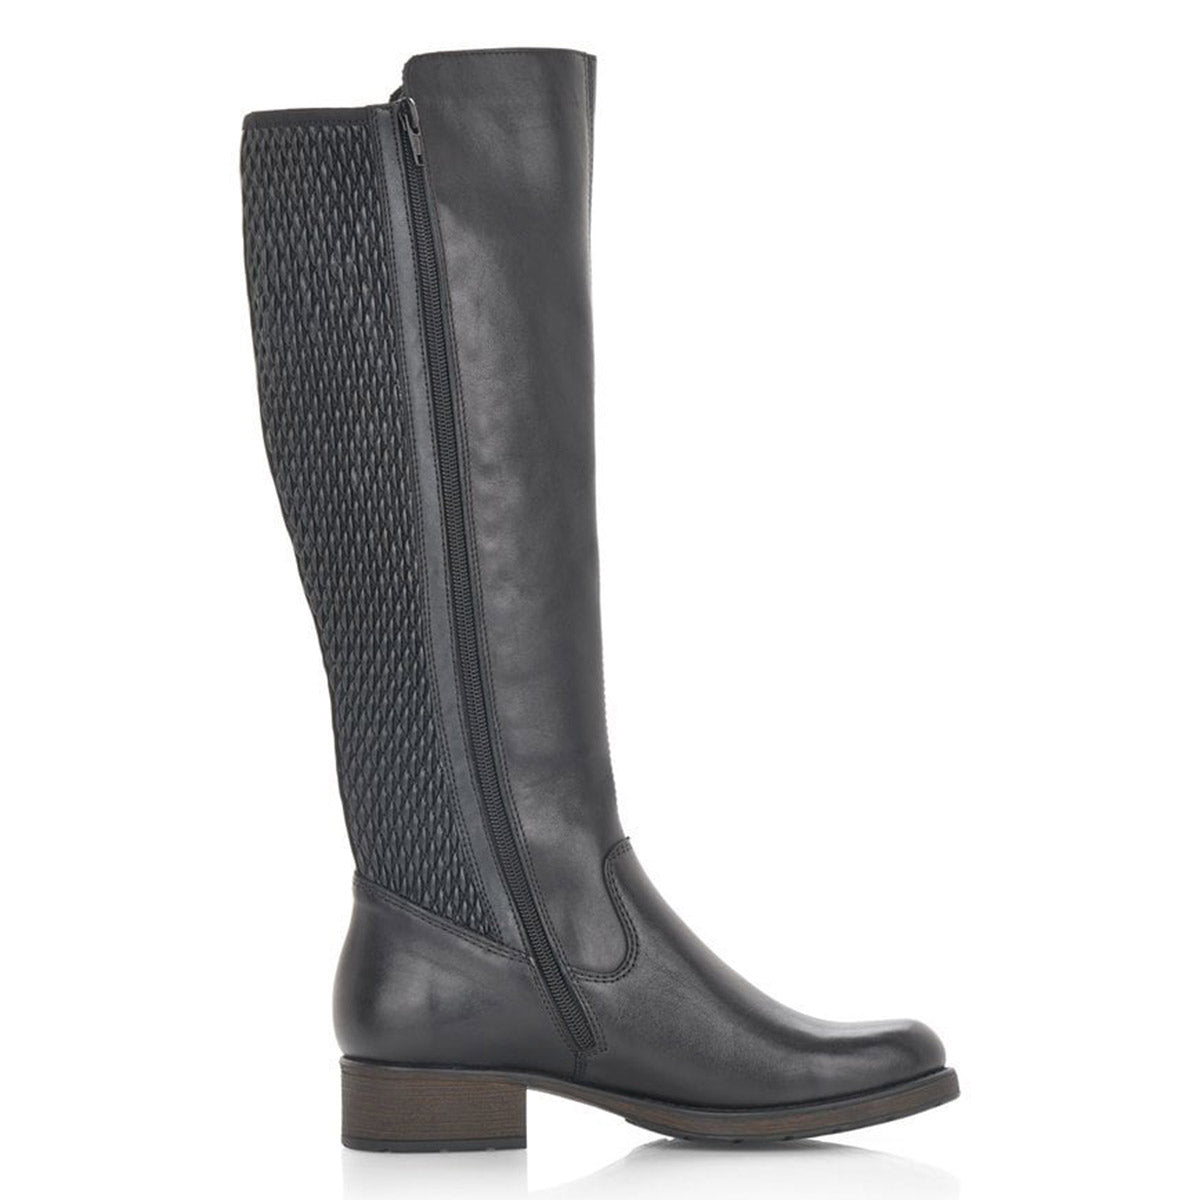 A black vegan leather RIEKER FAITH 91 knee-high boot featuring a textured elastic panel and a low stacked heel, isolated on a white background.